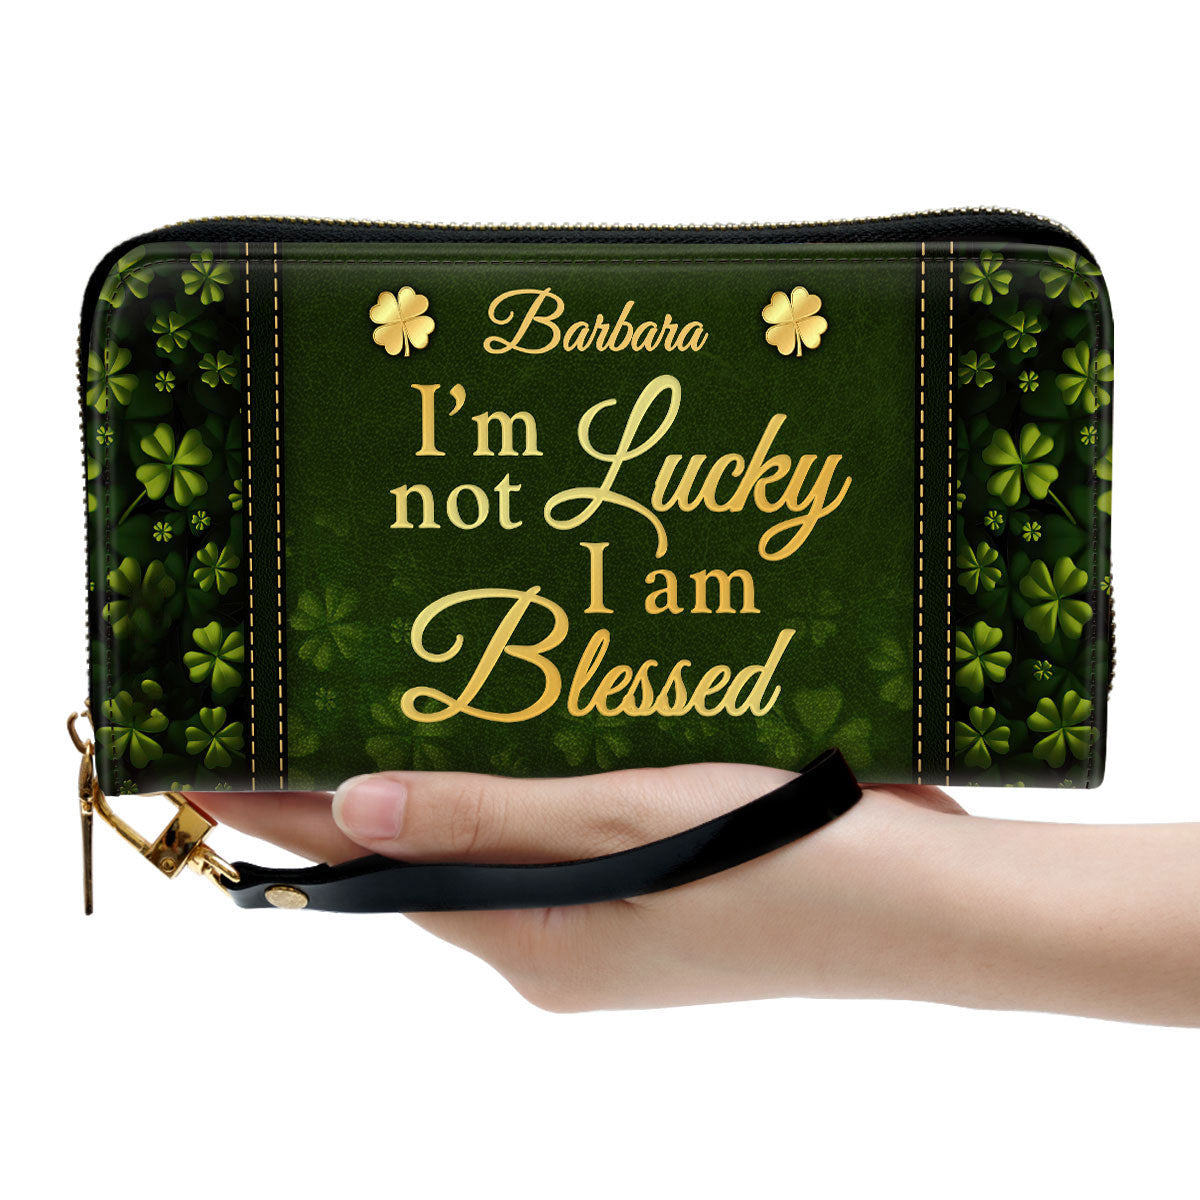 Women Clutch Purse - I‘M Not Lucky I Am Blessed - Lovely Personalized Clutch Purse